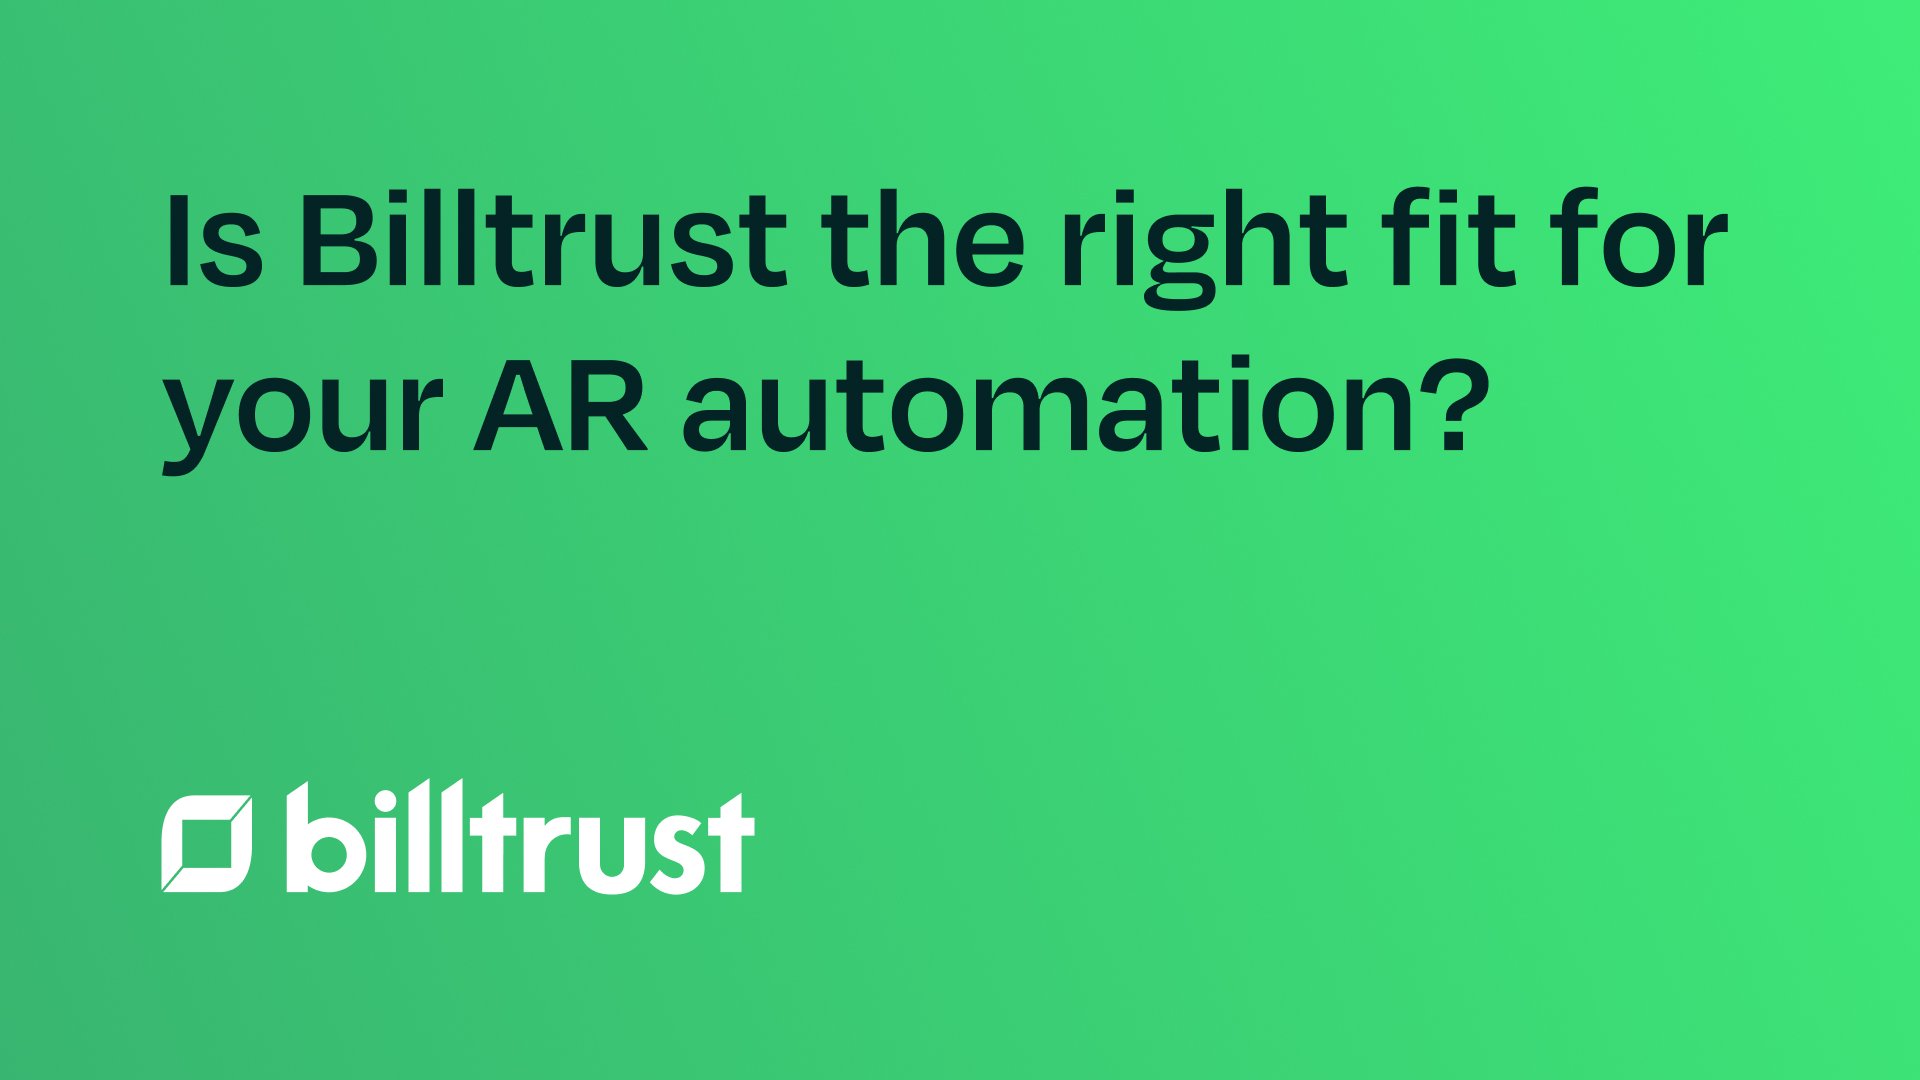 Is Billtrust the right fit for your AR automation